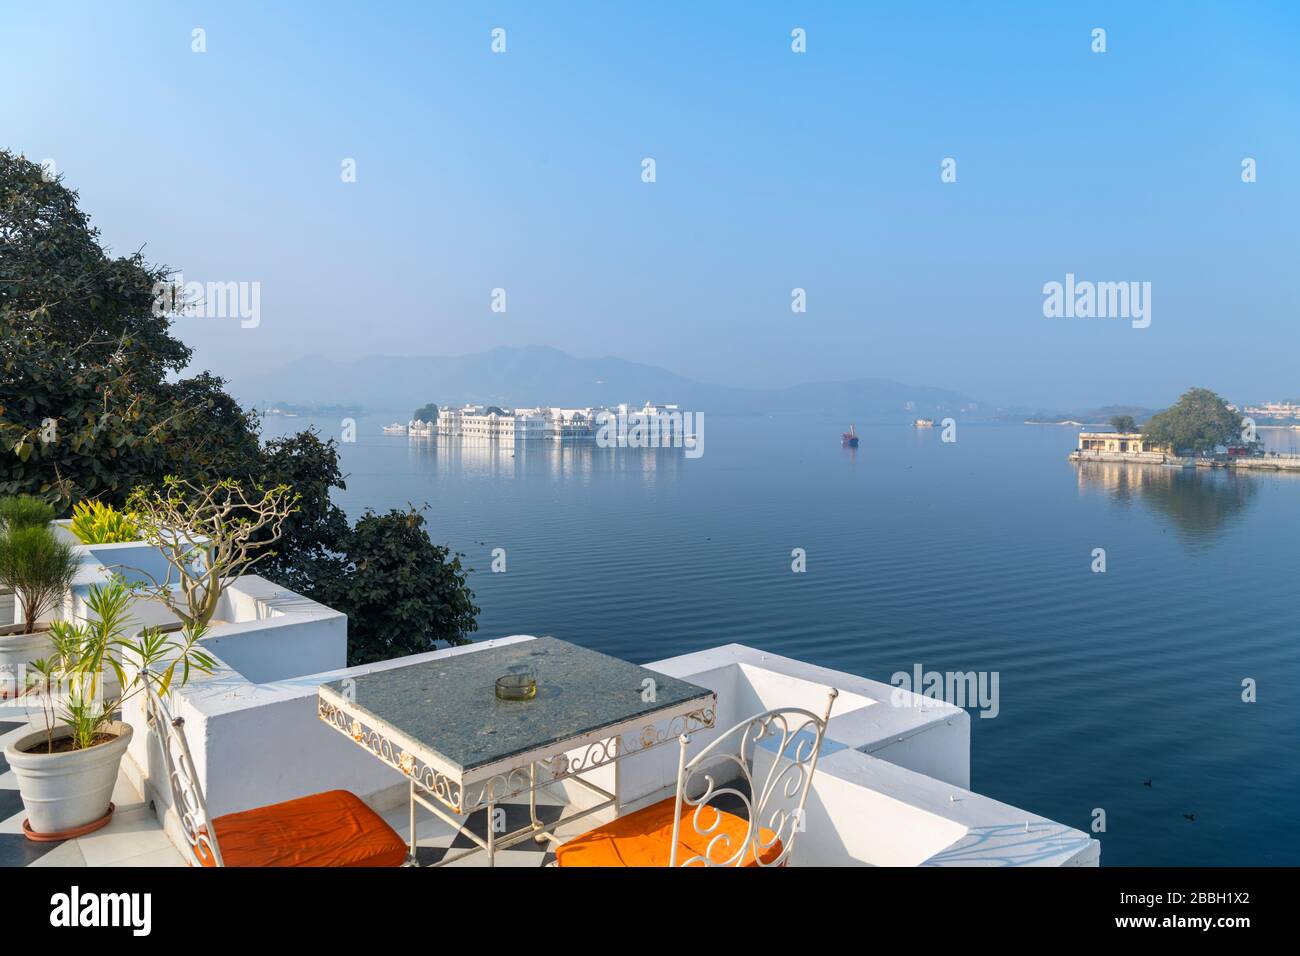 View over Lake Pichola and the Taj Lake Palace from the Jagat Niwas Palace Hotel in the early morning, Old City, Udaipur, Rajasthan, India Stock Photo